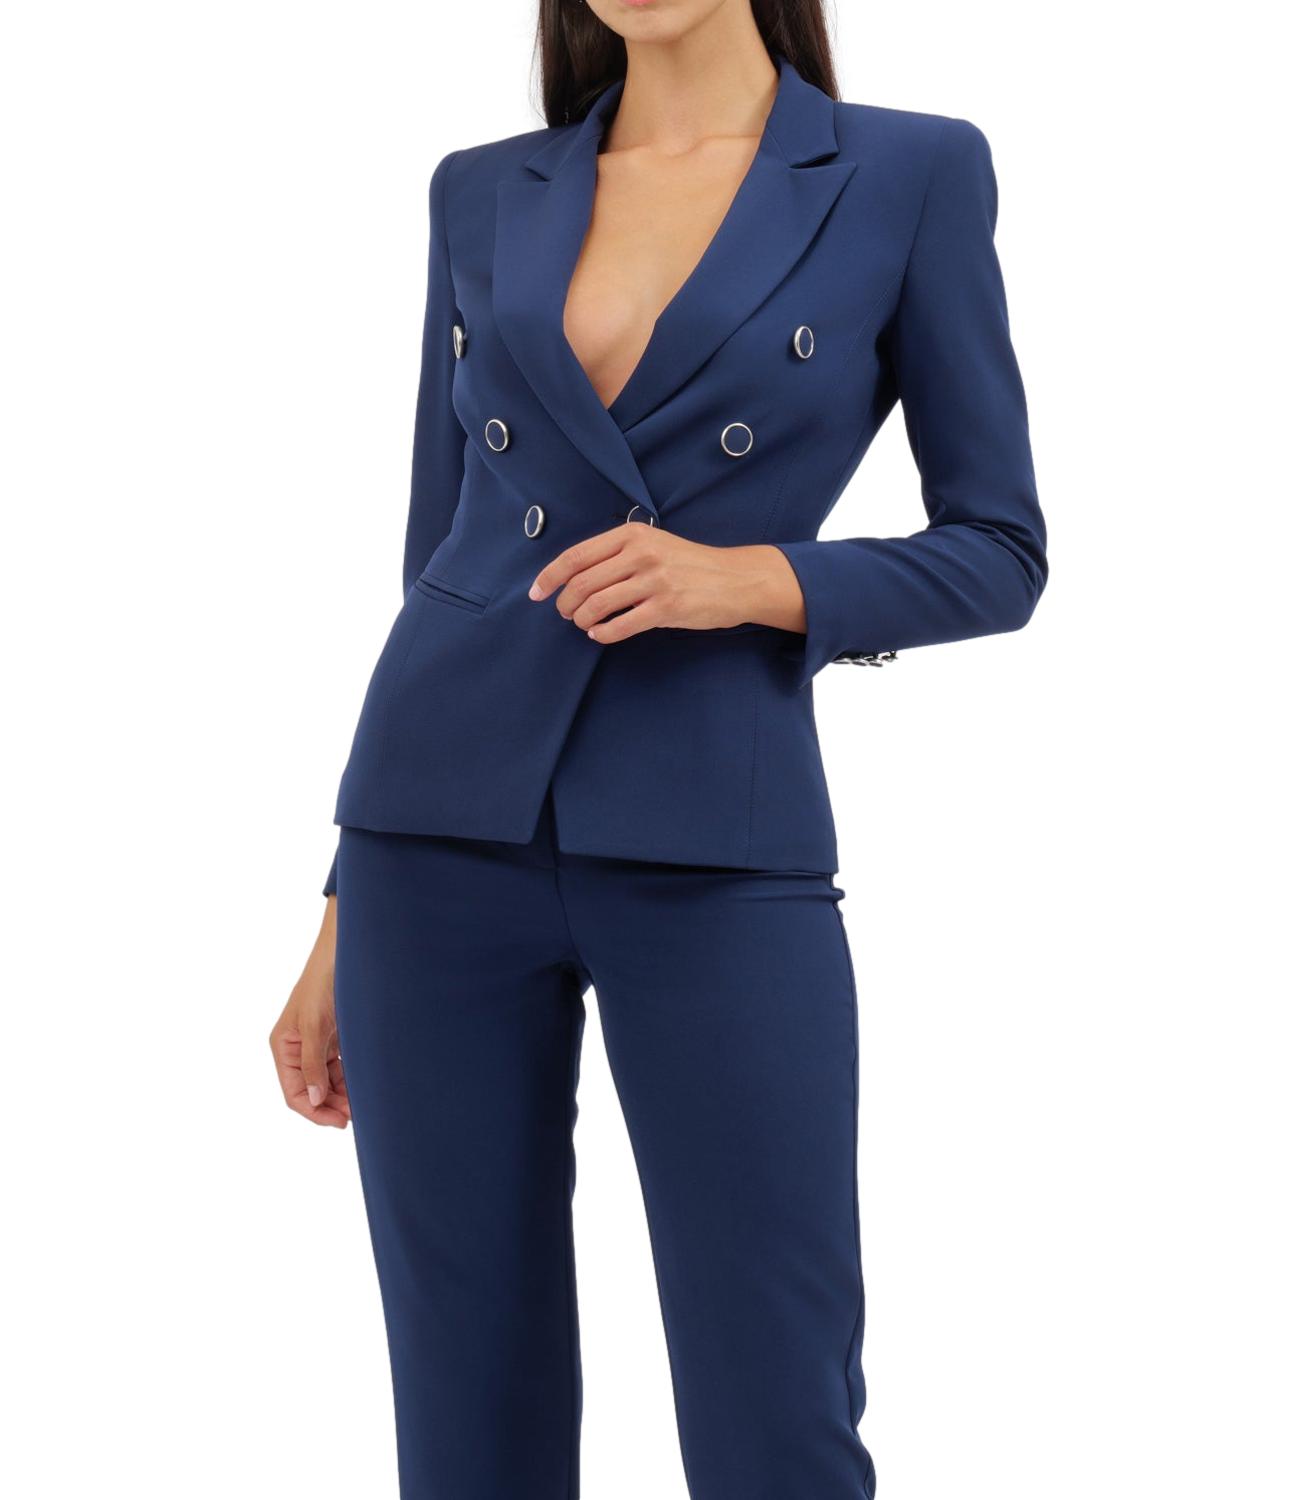 SILENCE LIMITED Giacca Cassiopea blu navy Donna